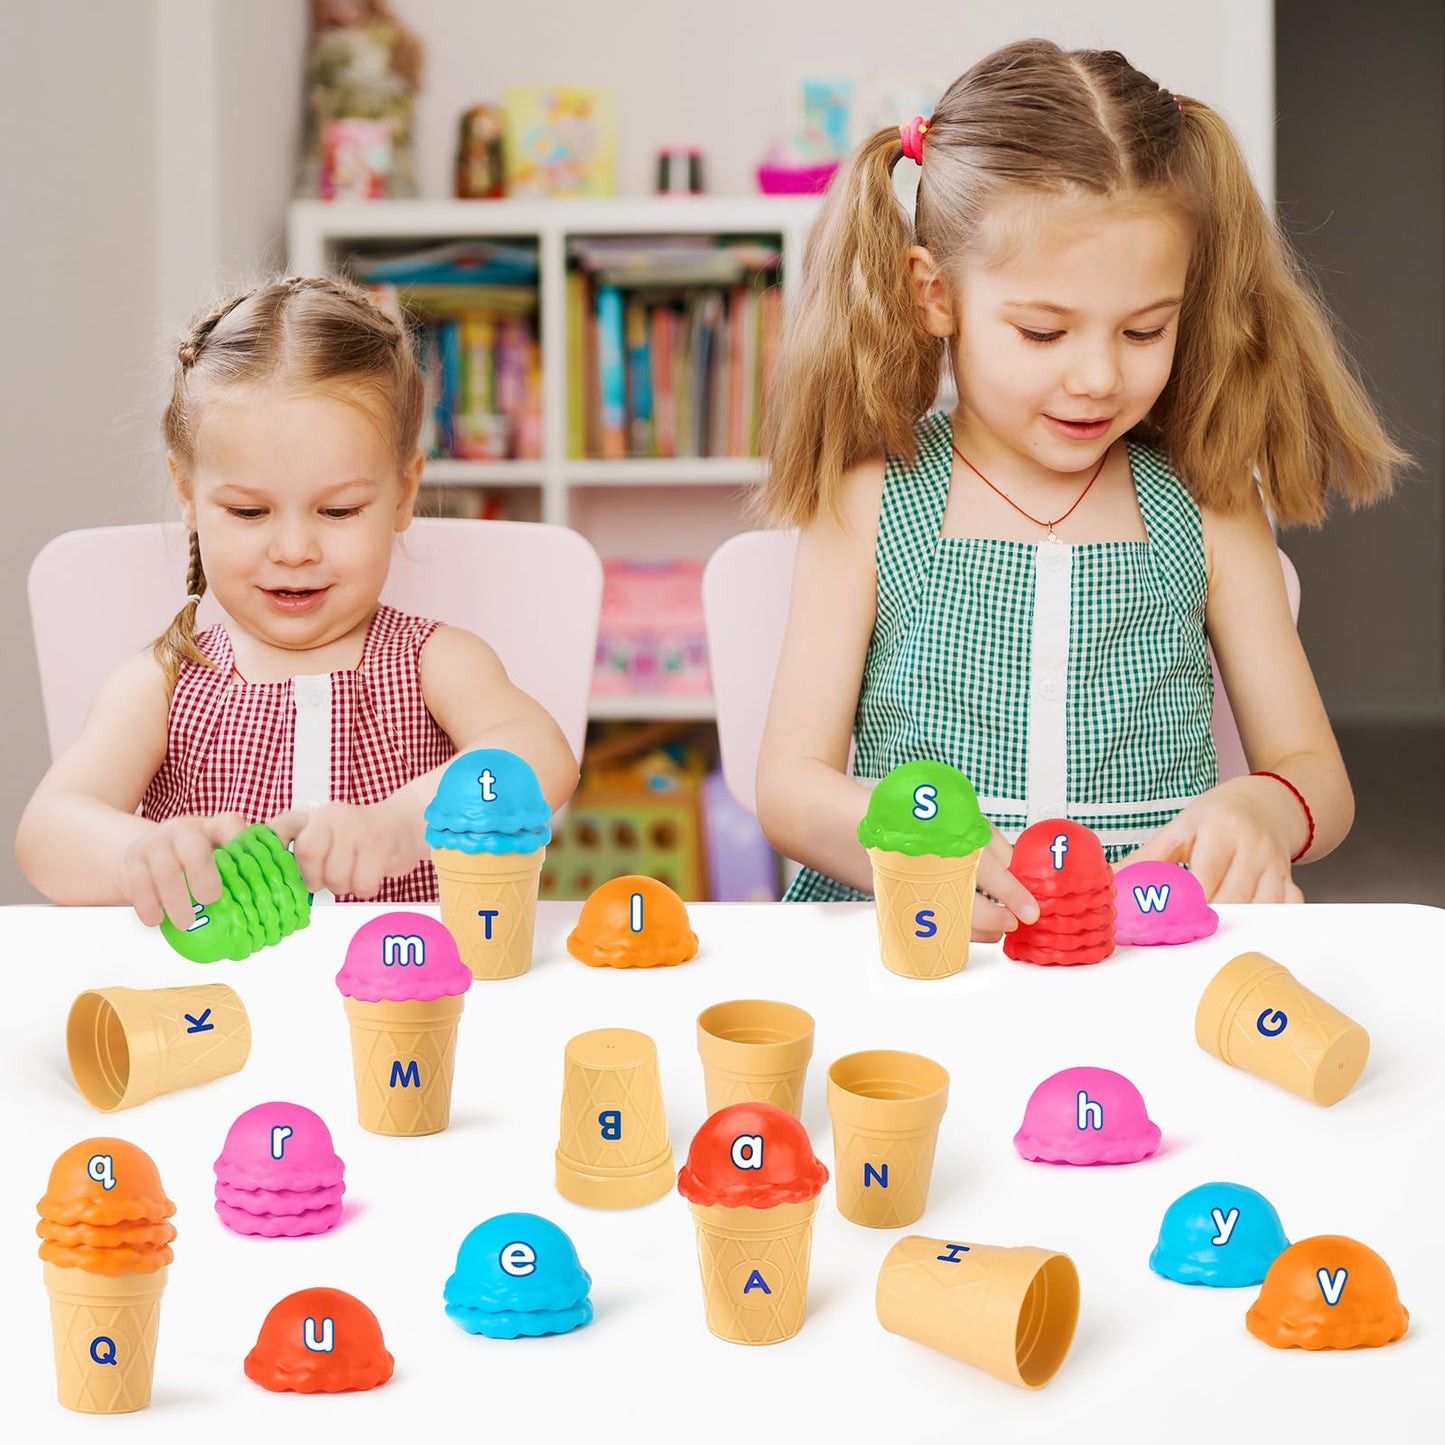 Shylizard Alphabet Ice Cream Toy Set for Kids Age 2 3 4 5, Color Sorting Recognition Toys, Toddler ABC Learning Toys, Alphabet Matching Toys, Fine Motor Skills Toys, Preschool Educational Toy for Kids